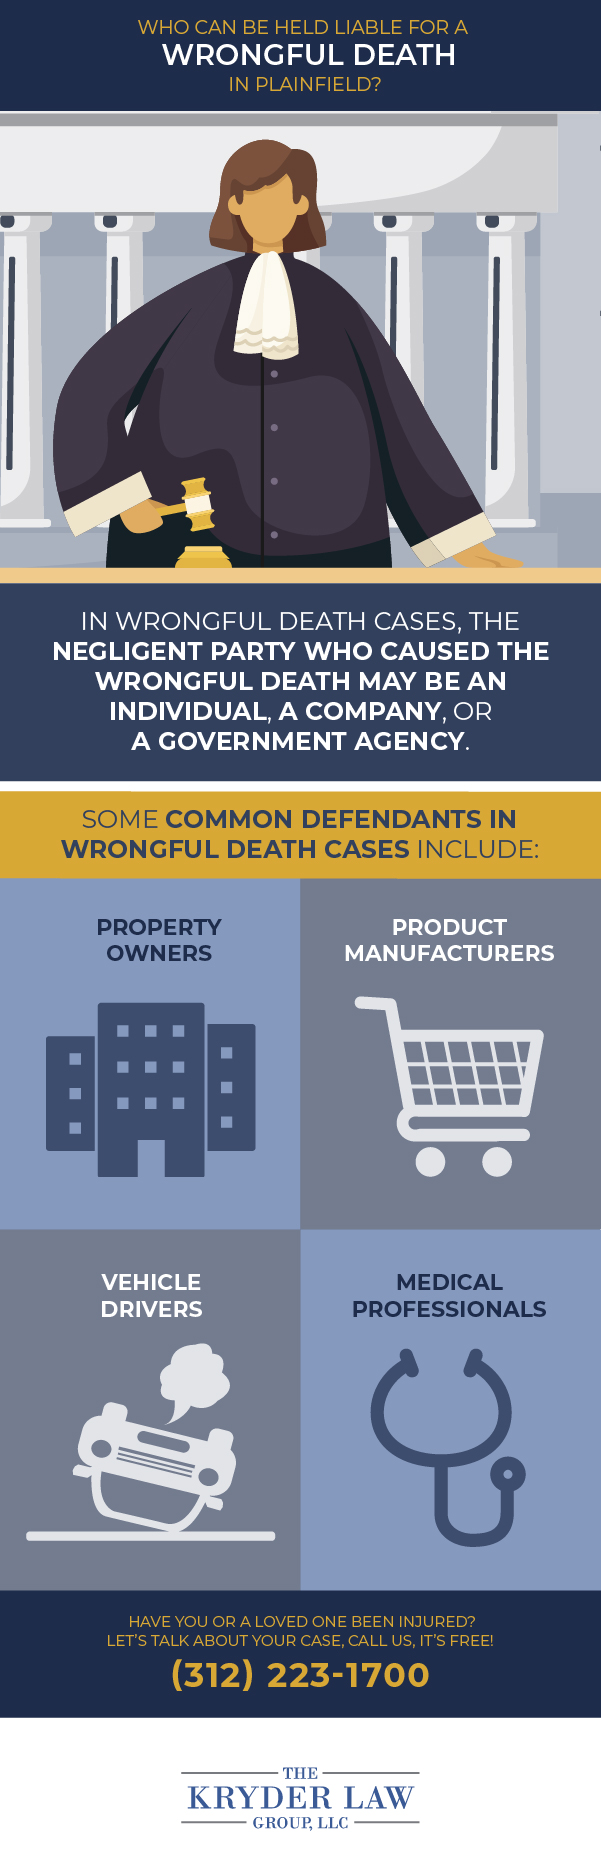 The Benefits of Hiring a Plainfield Wrongful Death Lawyer Infographic